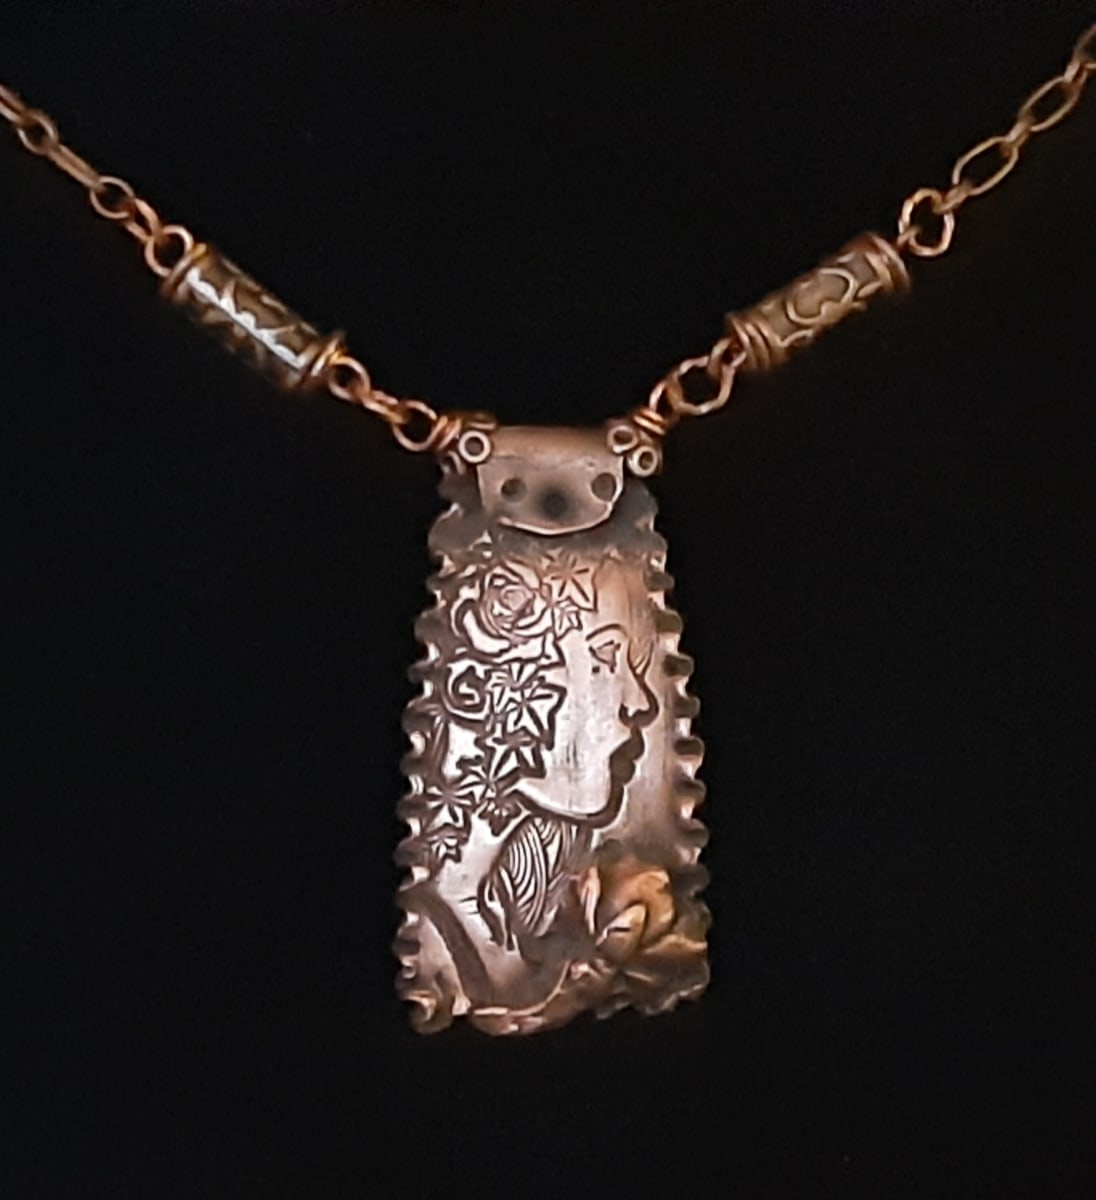 Copper Clay Girl Necklace by Therese Miskulin 